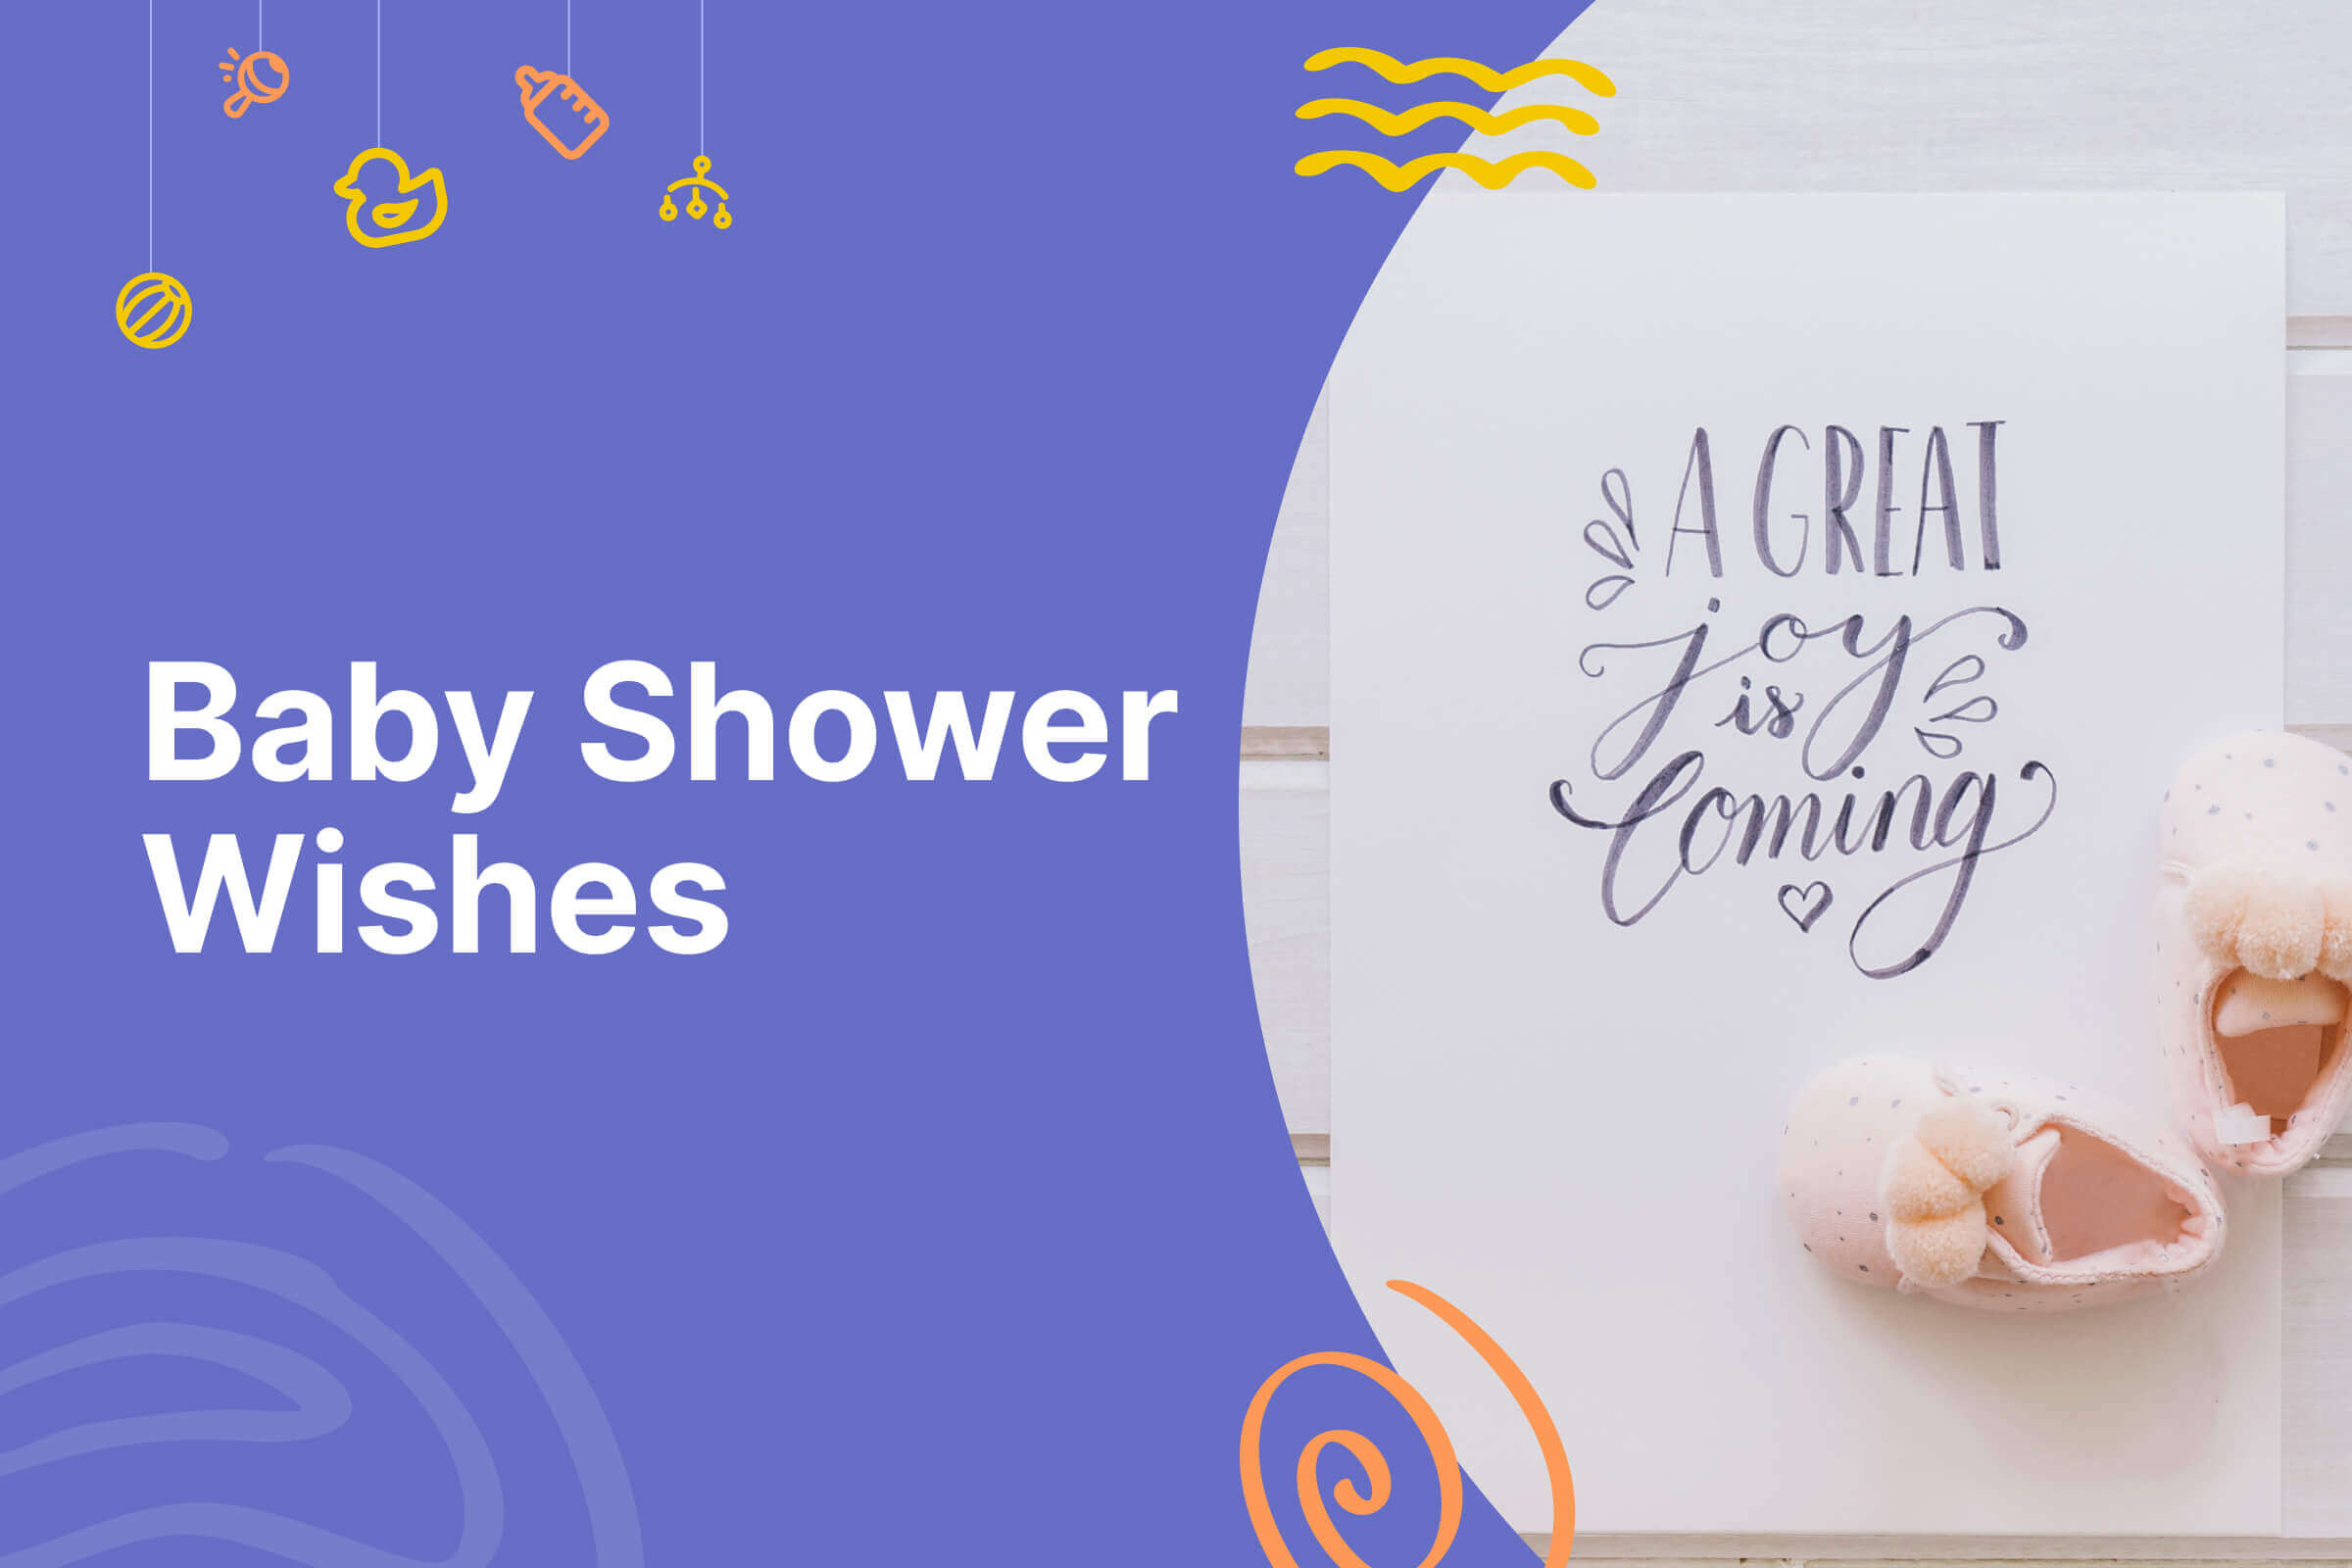 Thumbnail of baby shower wishes